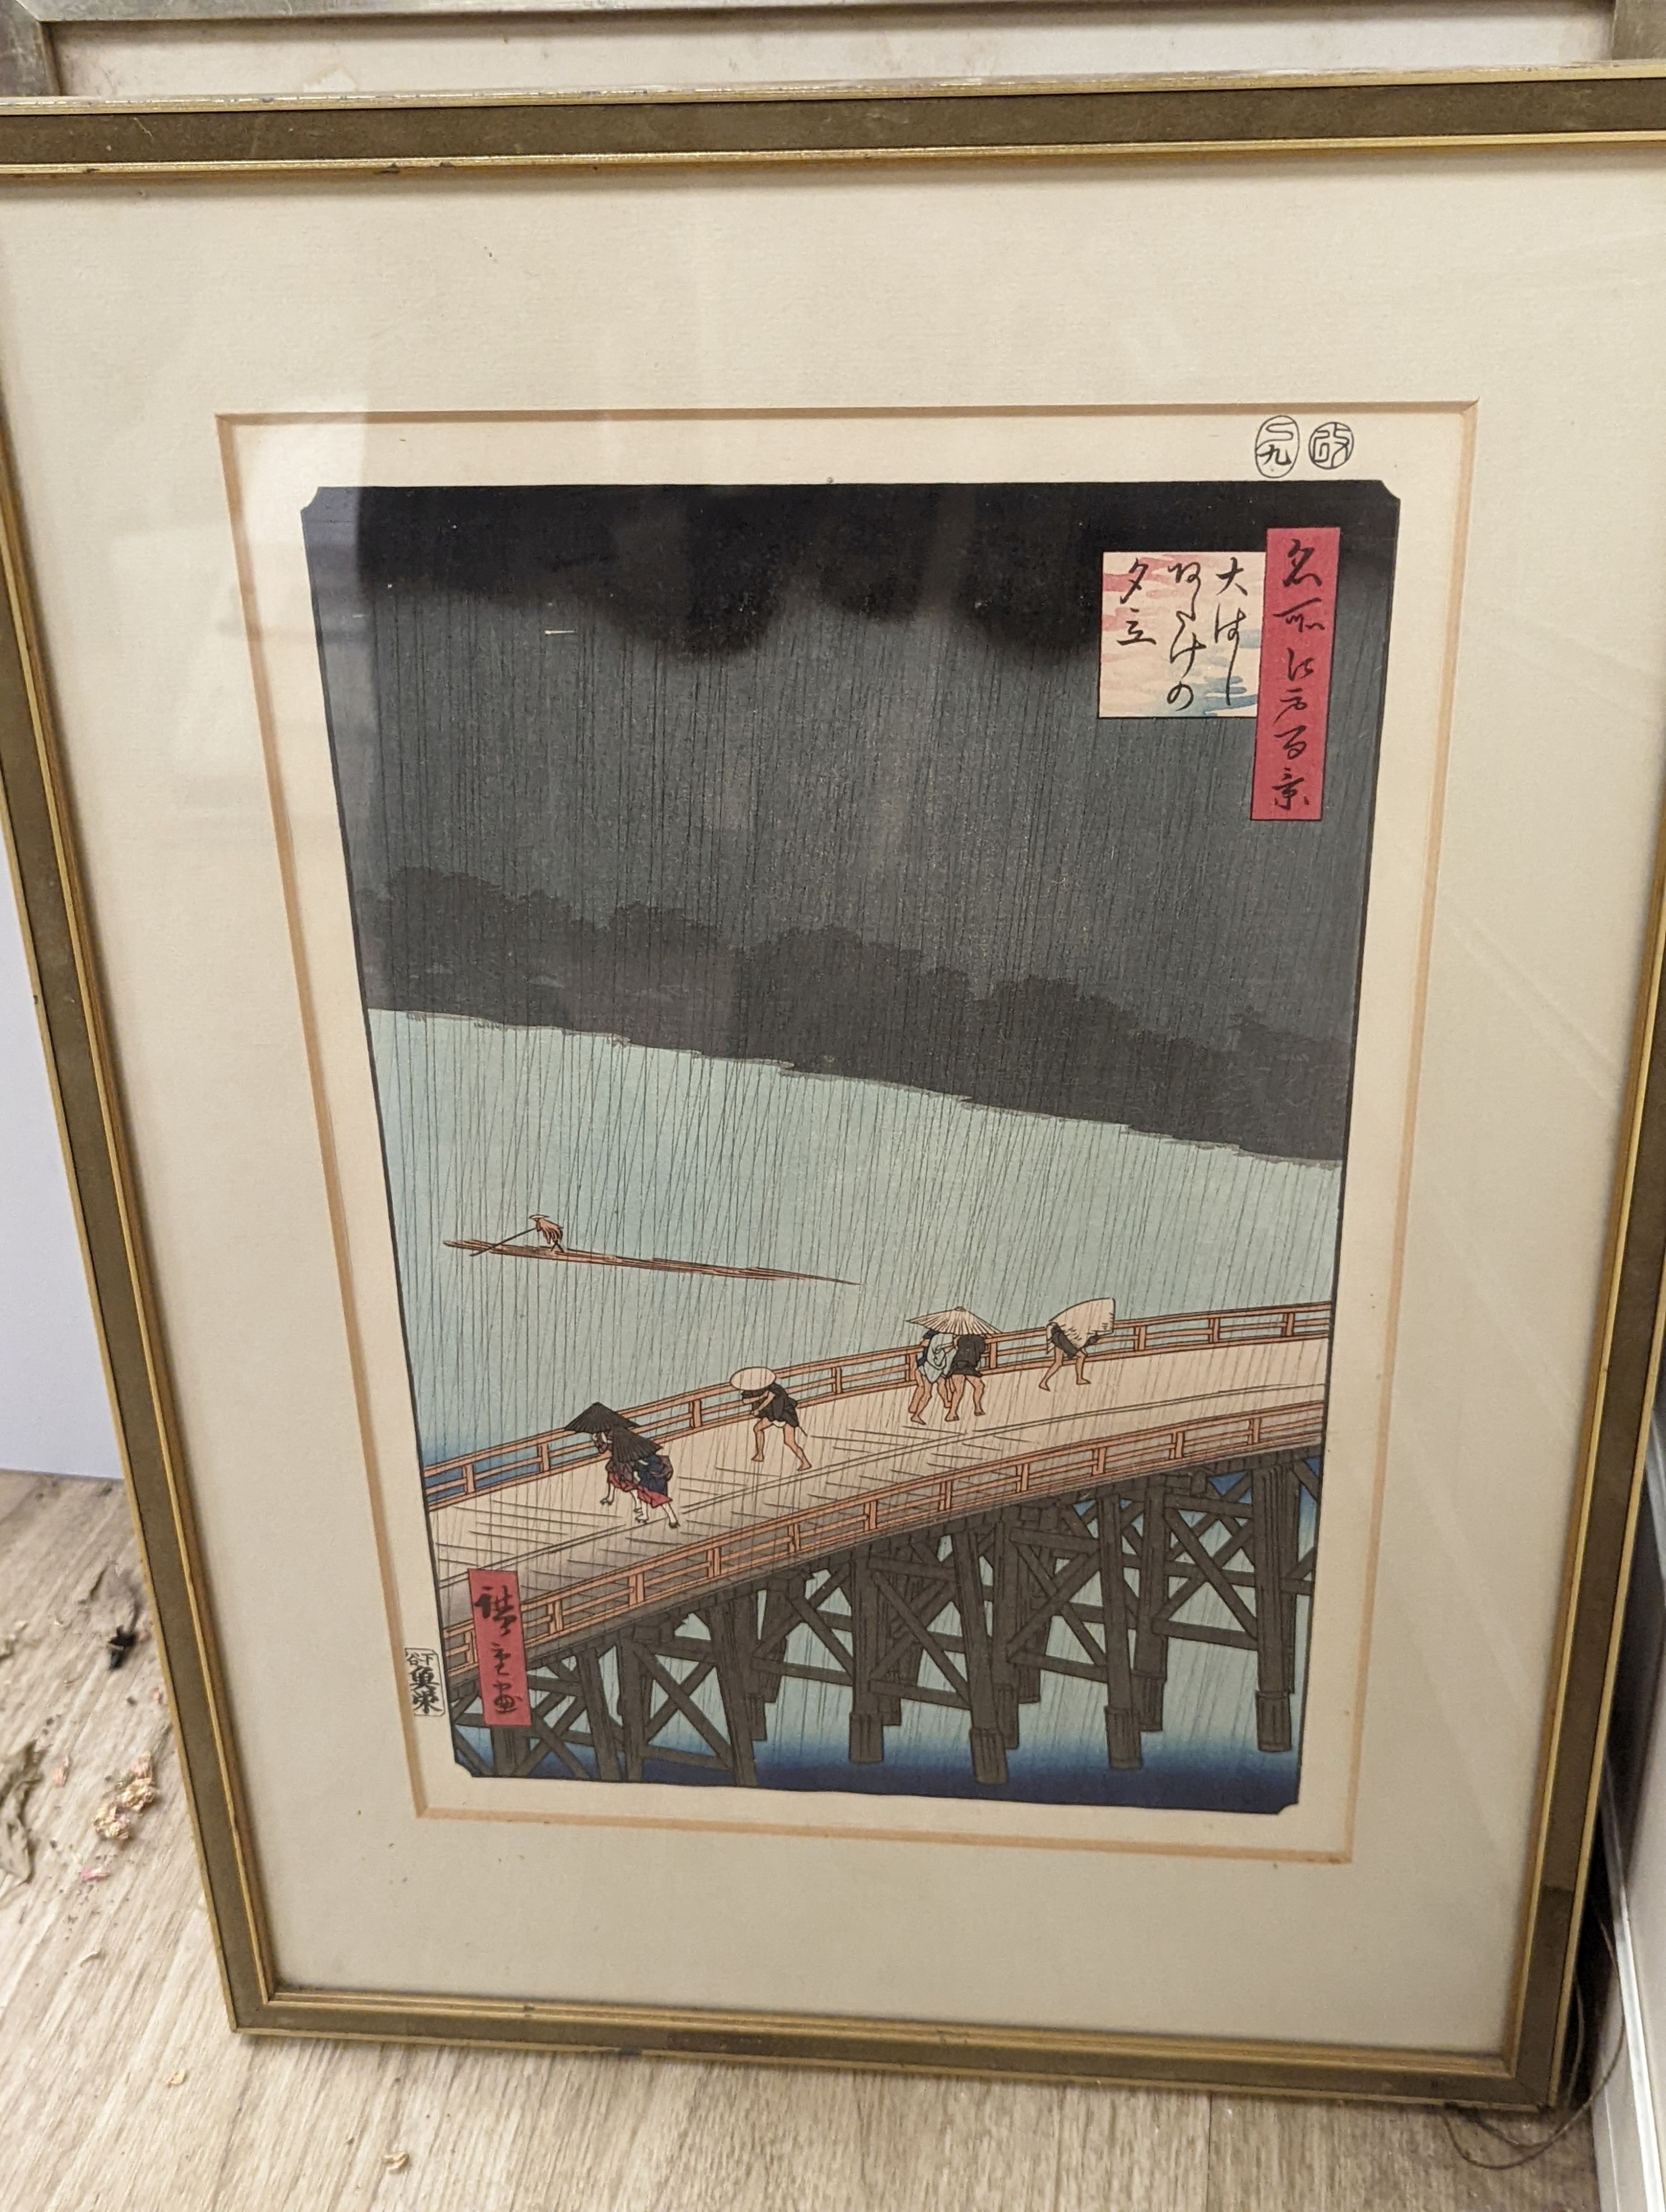 Hiroshige, woodblock print, 'Southern Shower over Shin-Ohashi Bridge', 36 x 24cm, and eight other assorted woodblock prints.